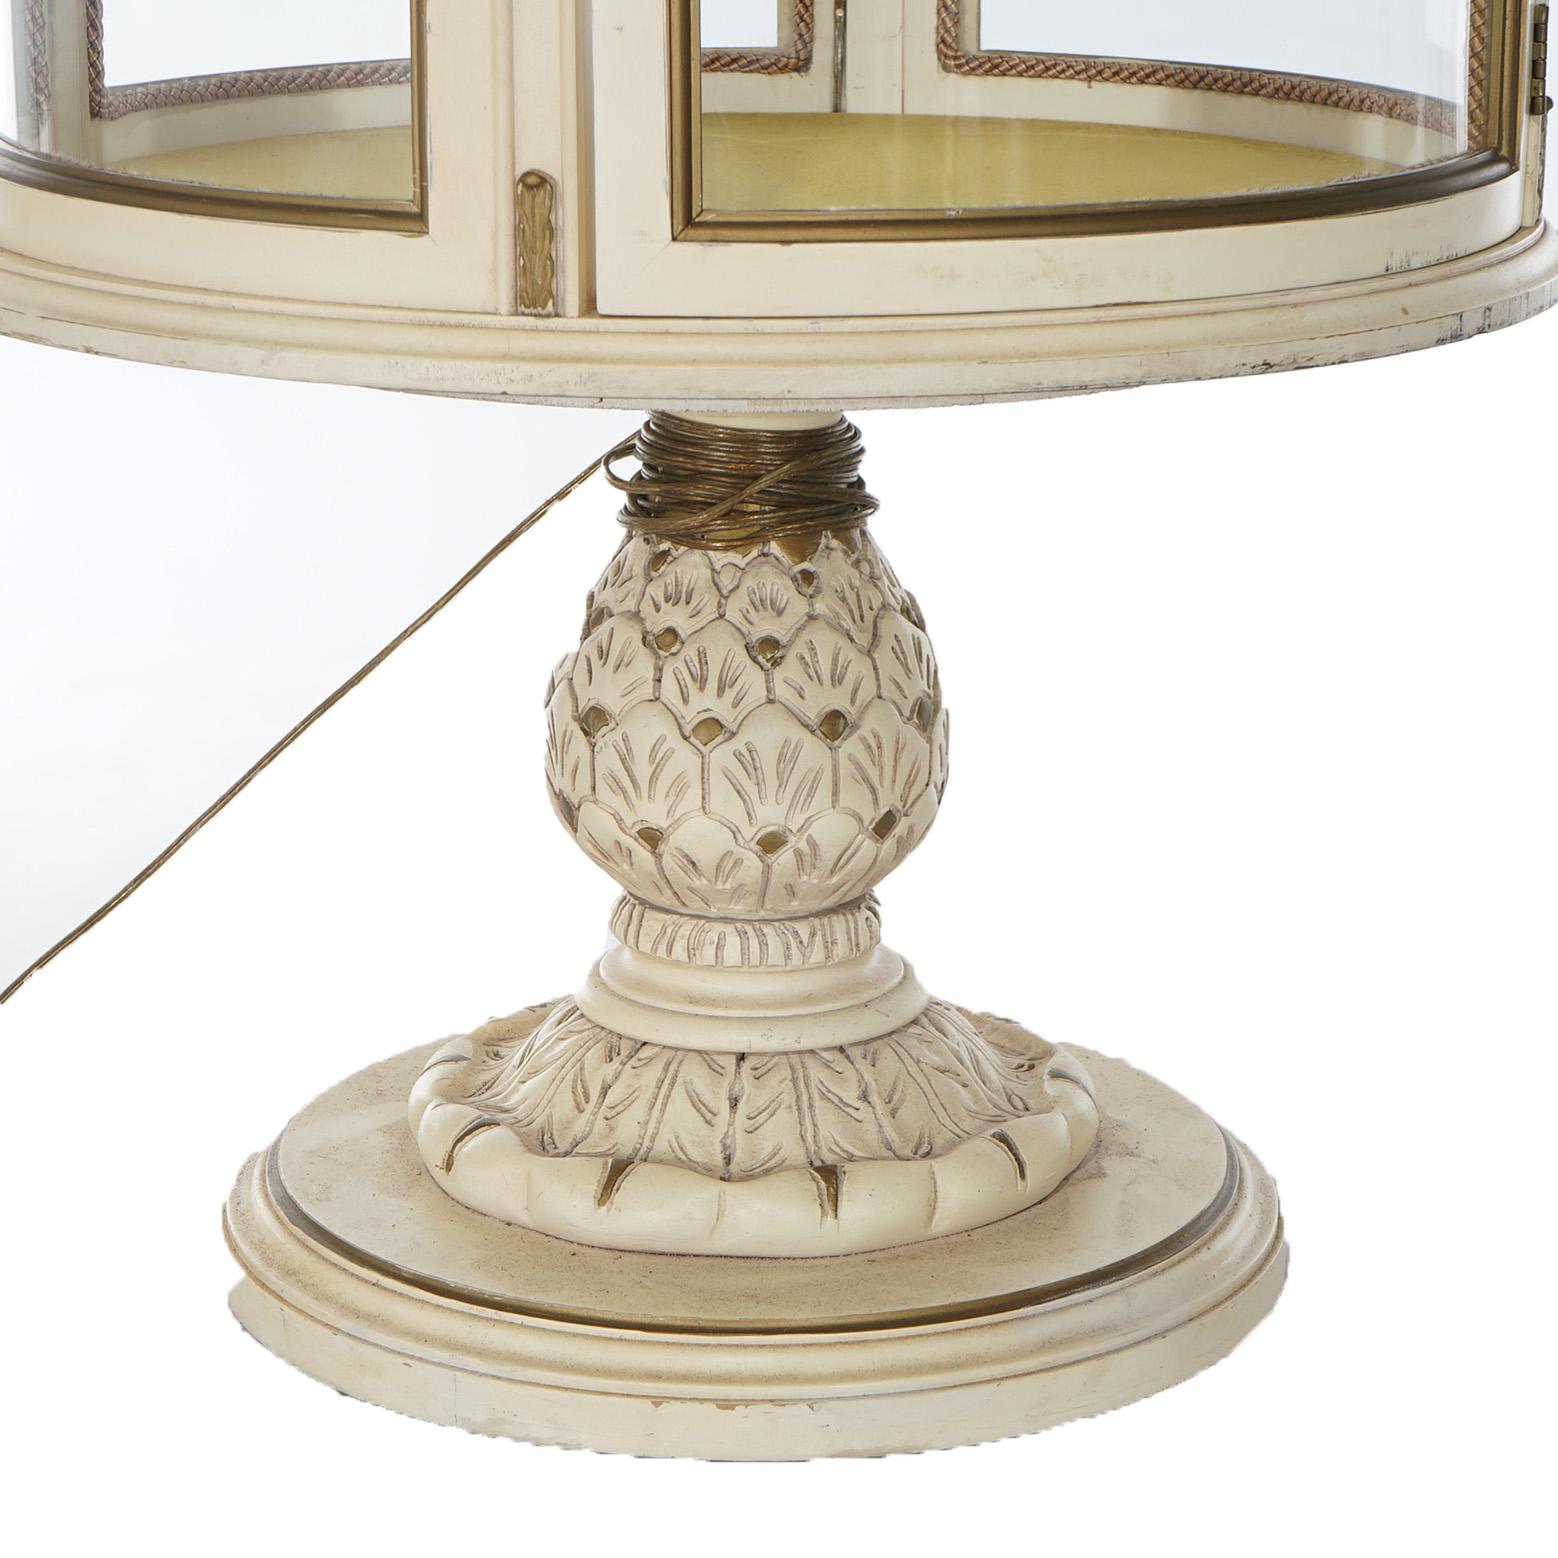 American French Style Circular Glass Display Vitrine on Pedestal, Painted & Gilt, 20th C